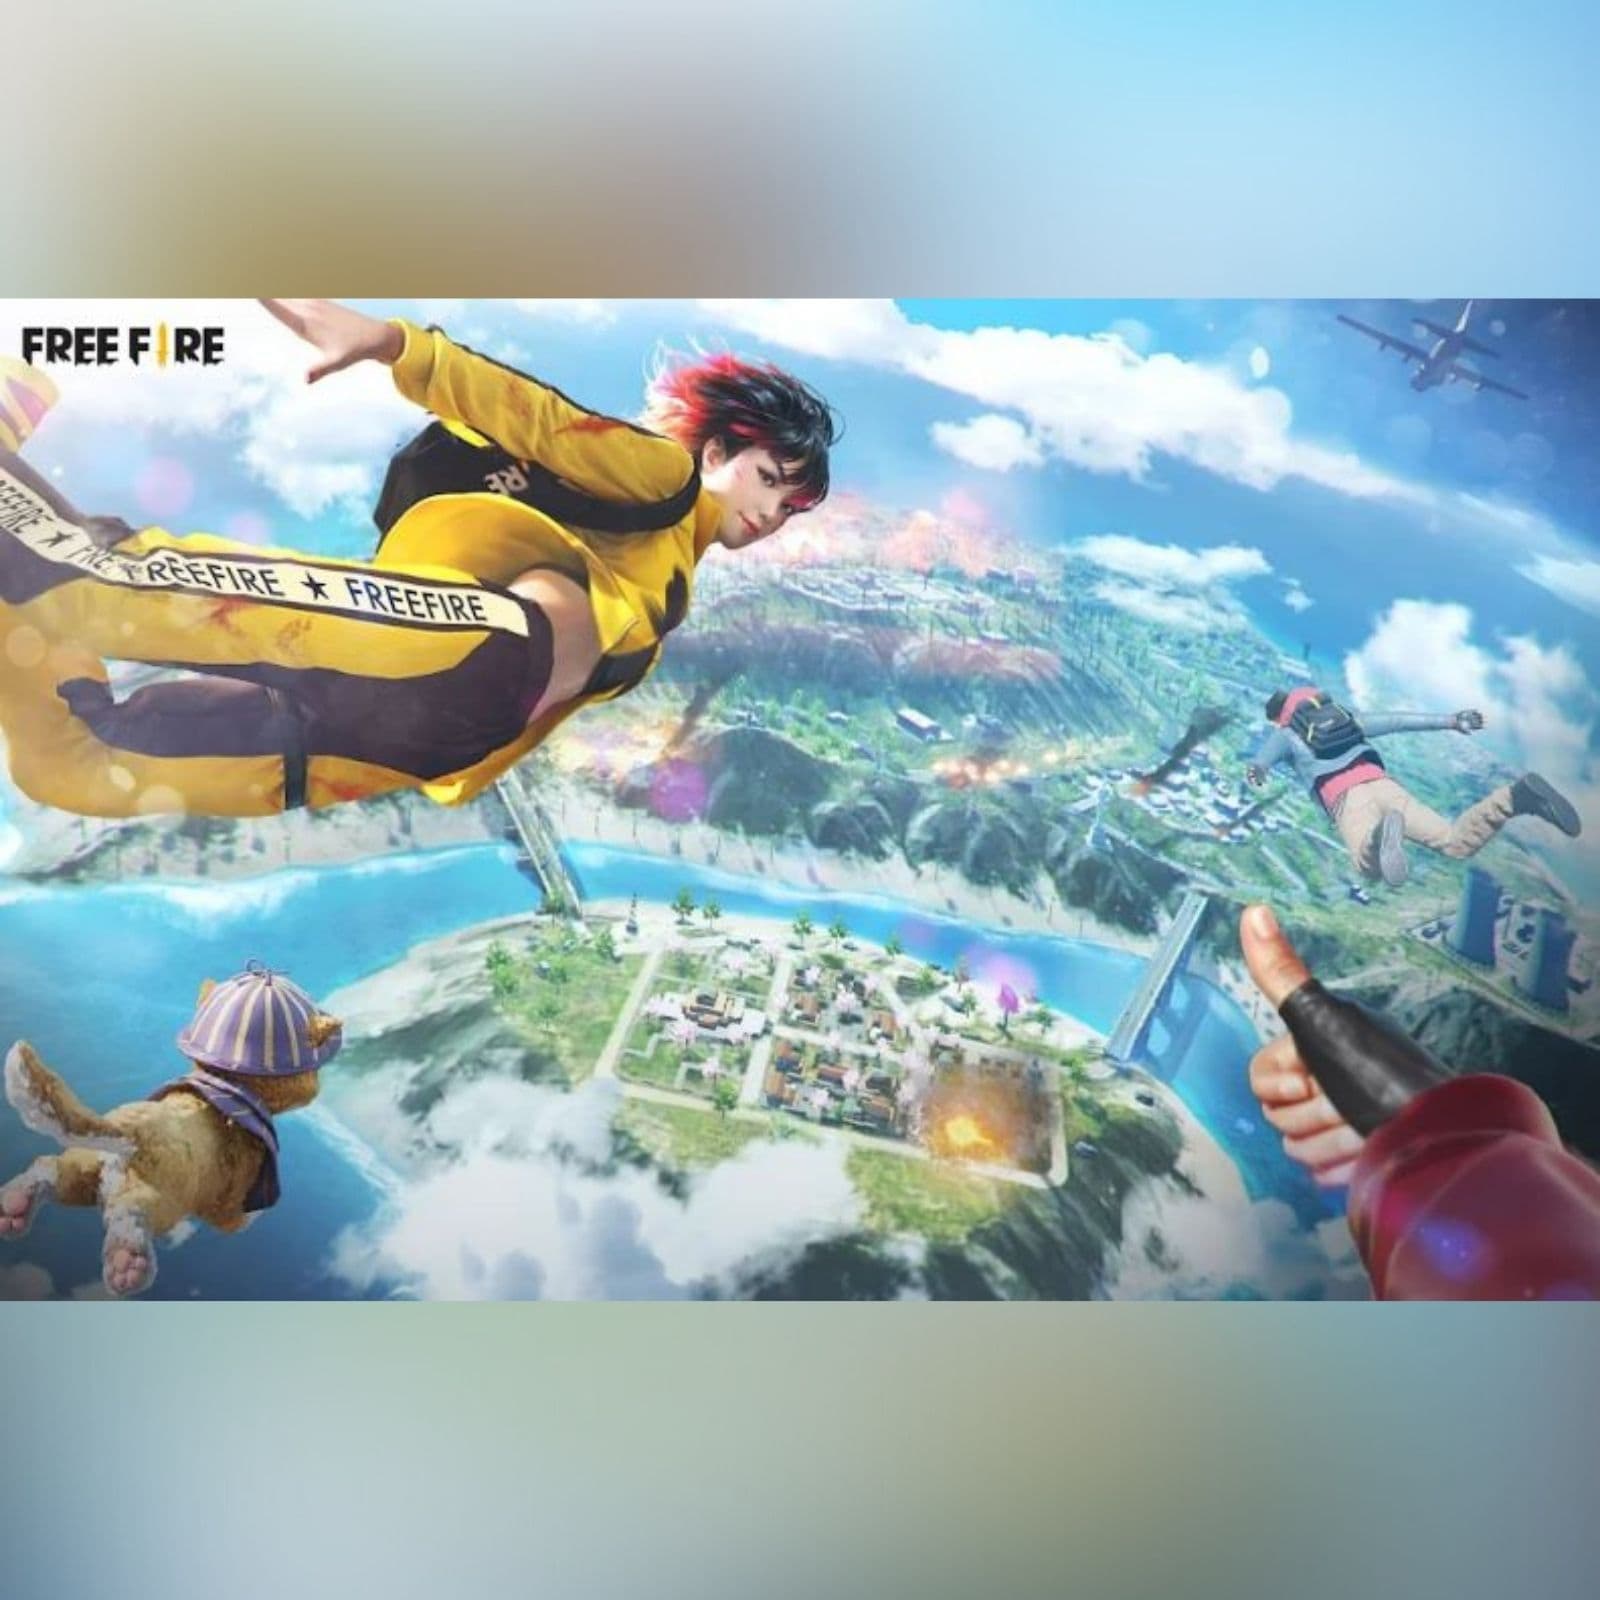 Garena Free Fire Ban In India: Most Users Can Still Play Free Fire Game  Despite Government Ban - News18